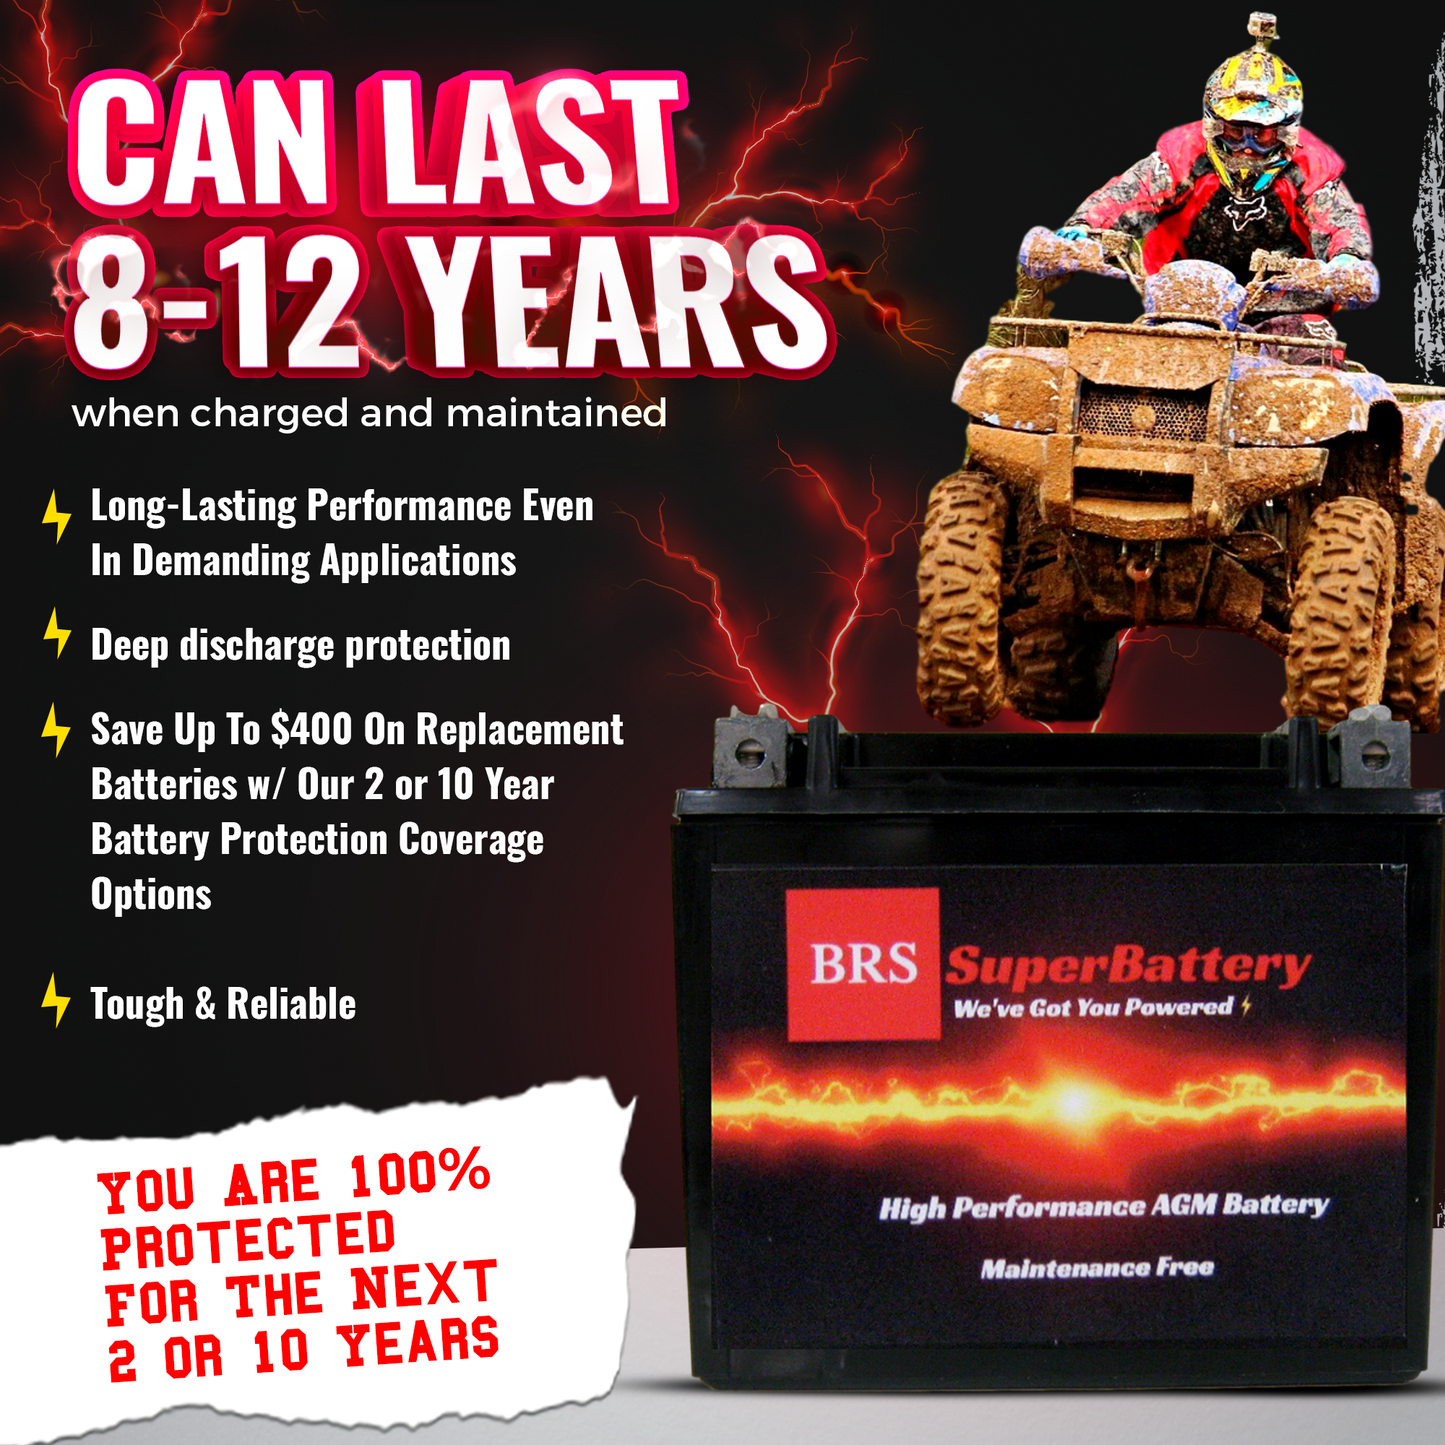 BRS4L-BS 12v High Performance Sealed AGM PowerSport 2 Year Battery - BRS Super Battery